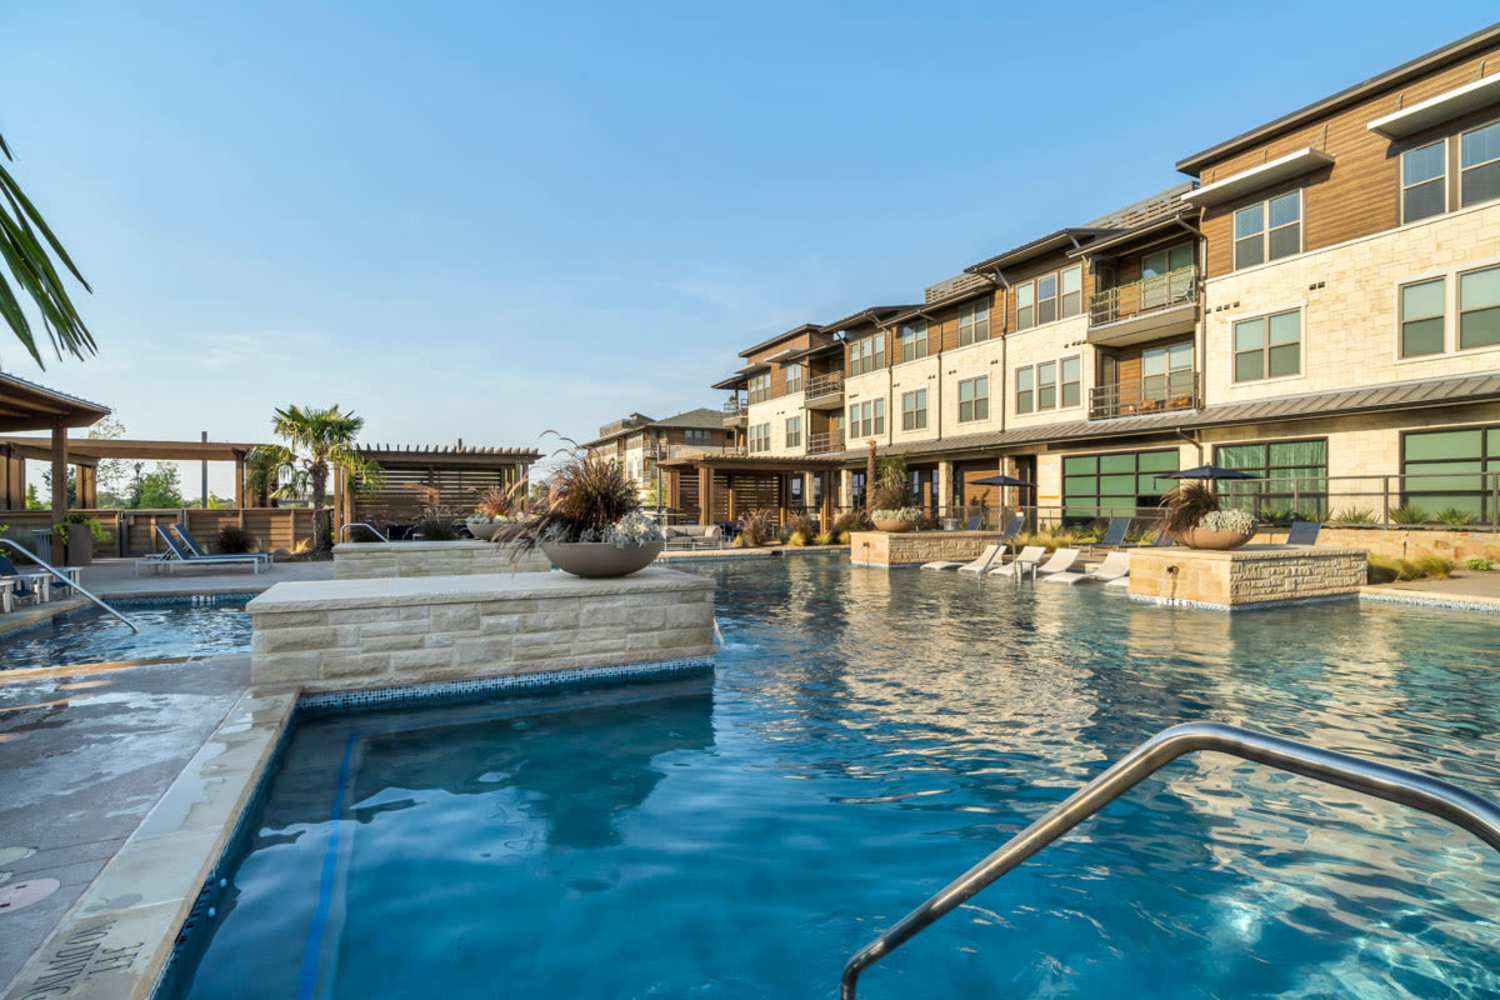 Resort-style pool with poolside seating at Chisholm at Tavolo Park in Fort Worth, Texas